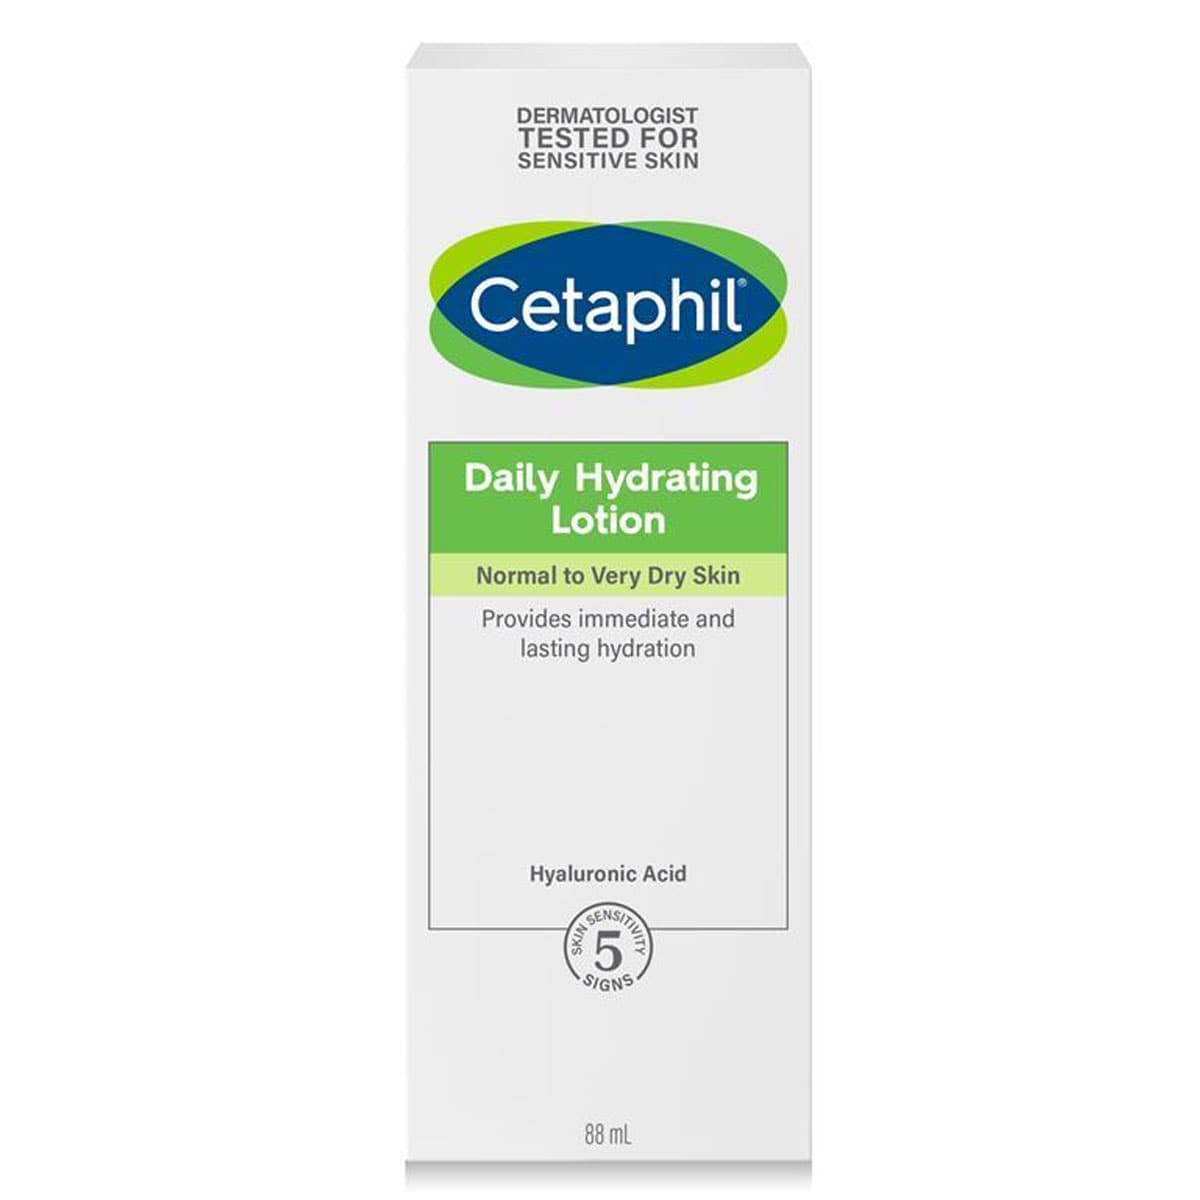 Cetaphil Daily Hydrating Facial Lotion with Hyaluronic Acid 88ml